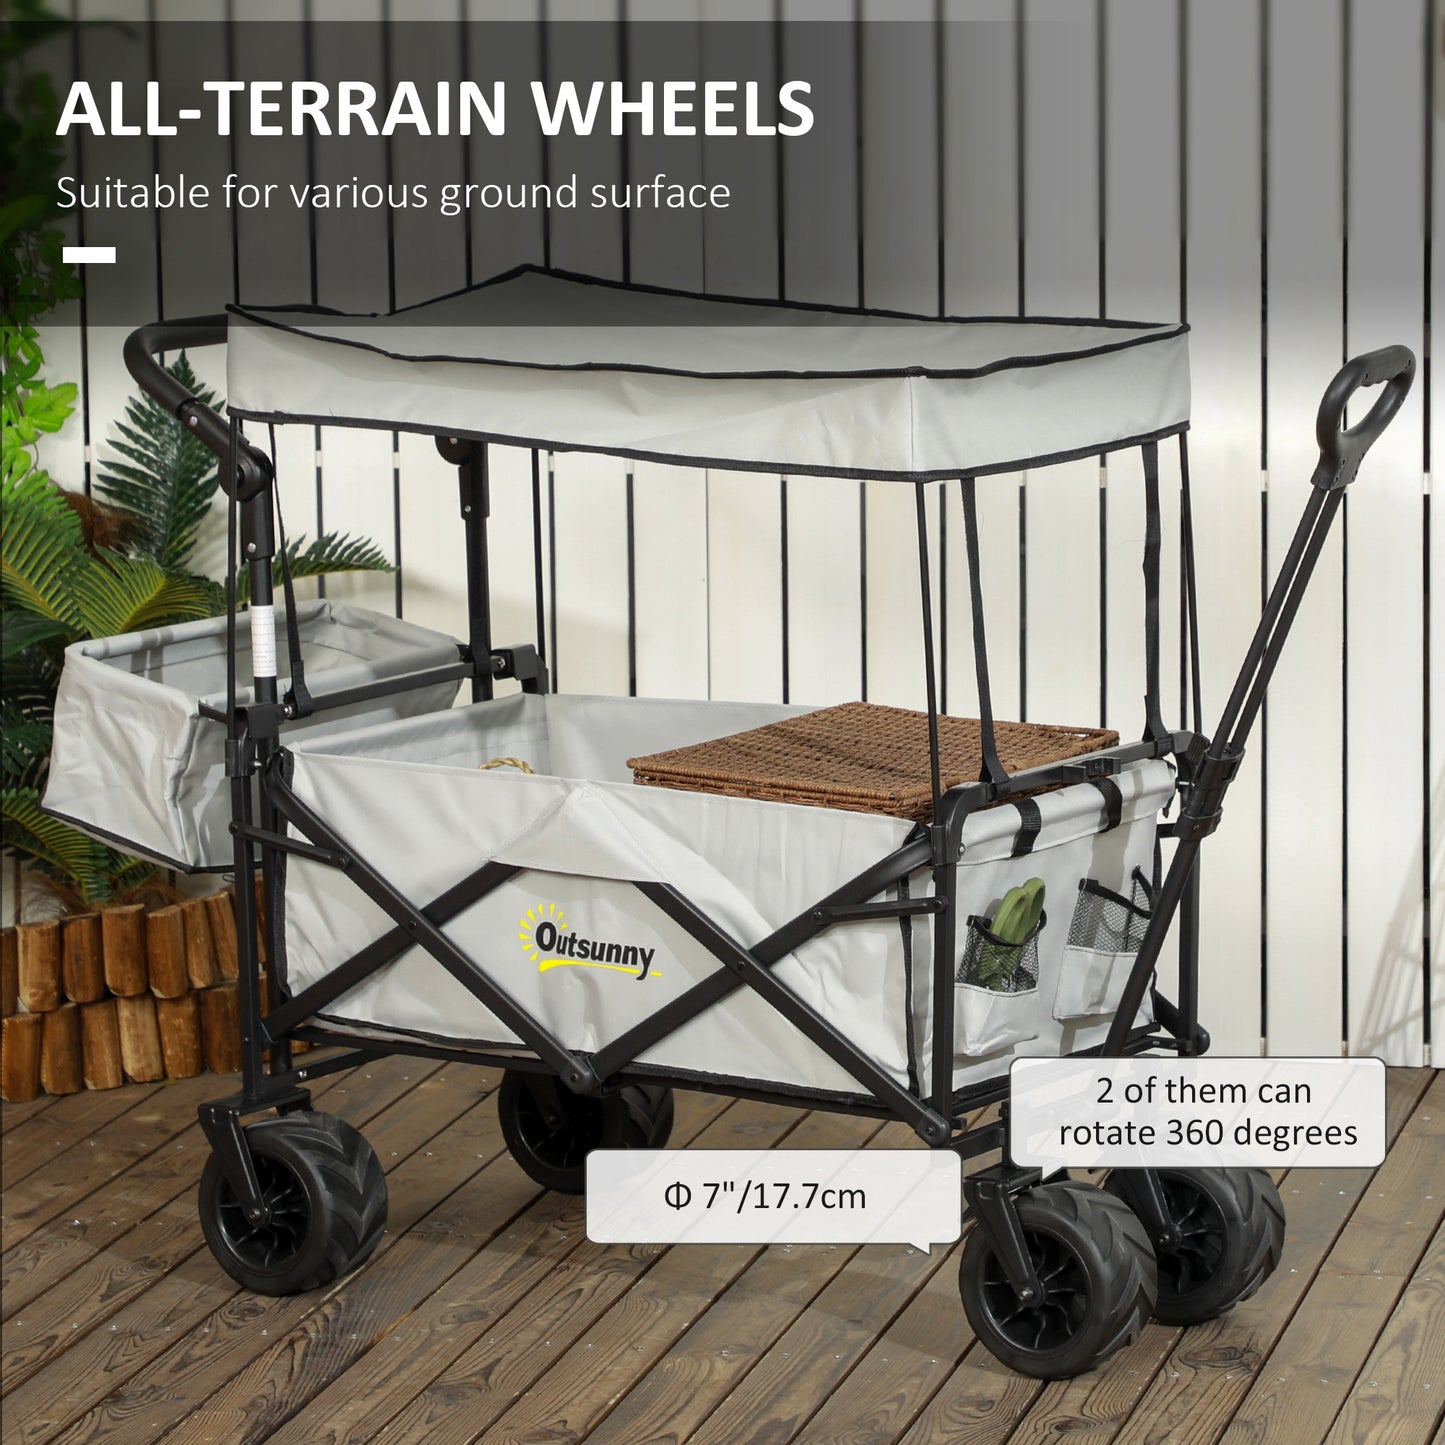 Outsunny Folding Trolley Cart Storage Wagon Beach Trailer 4 Wheels with Handle Overhead Canopy Cart Push Pull for Camping, Grey